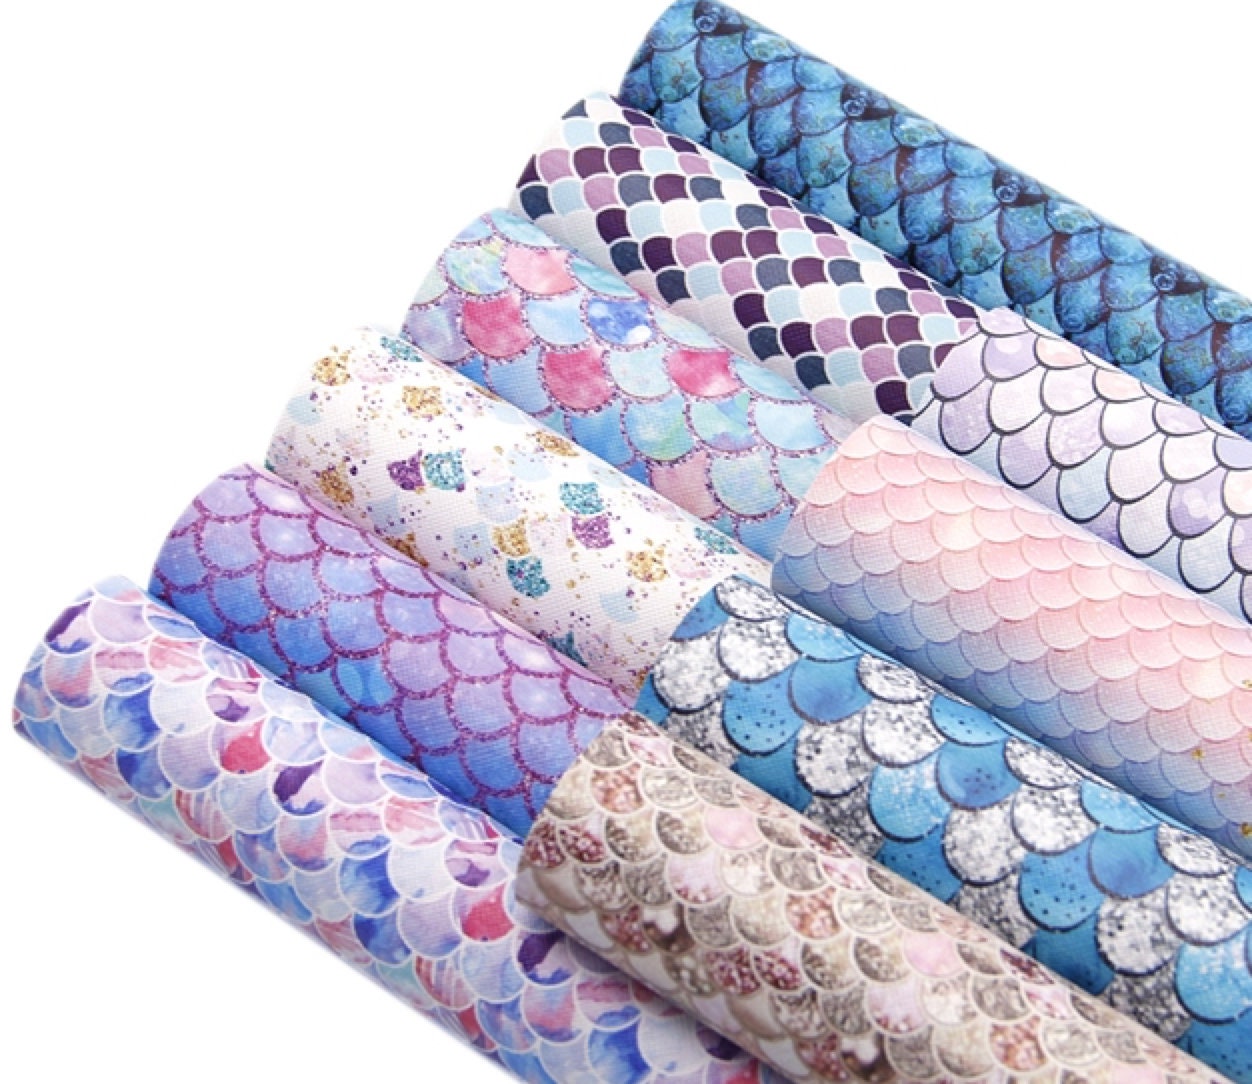 Mermaid/Fish scales pattern faux leather sheets great for bows and earrings TheFabricDude